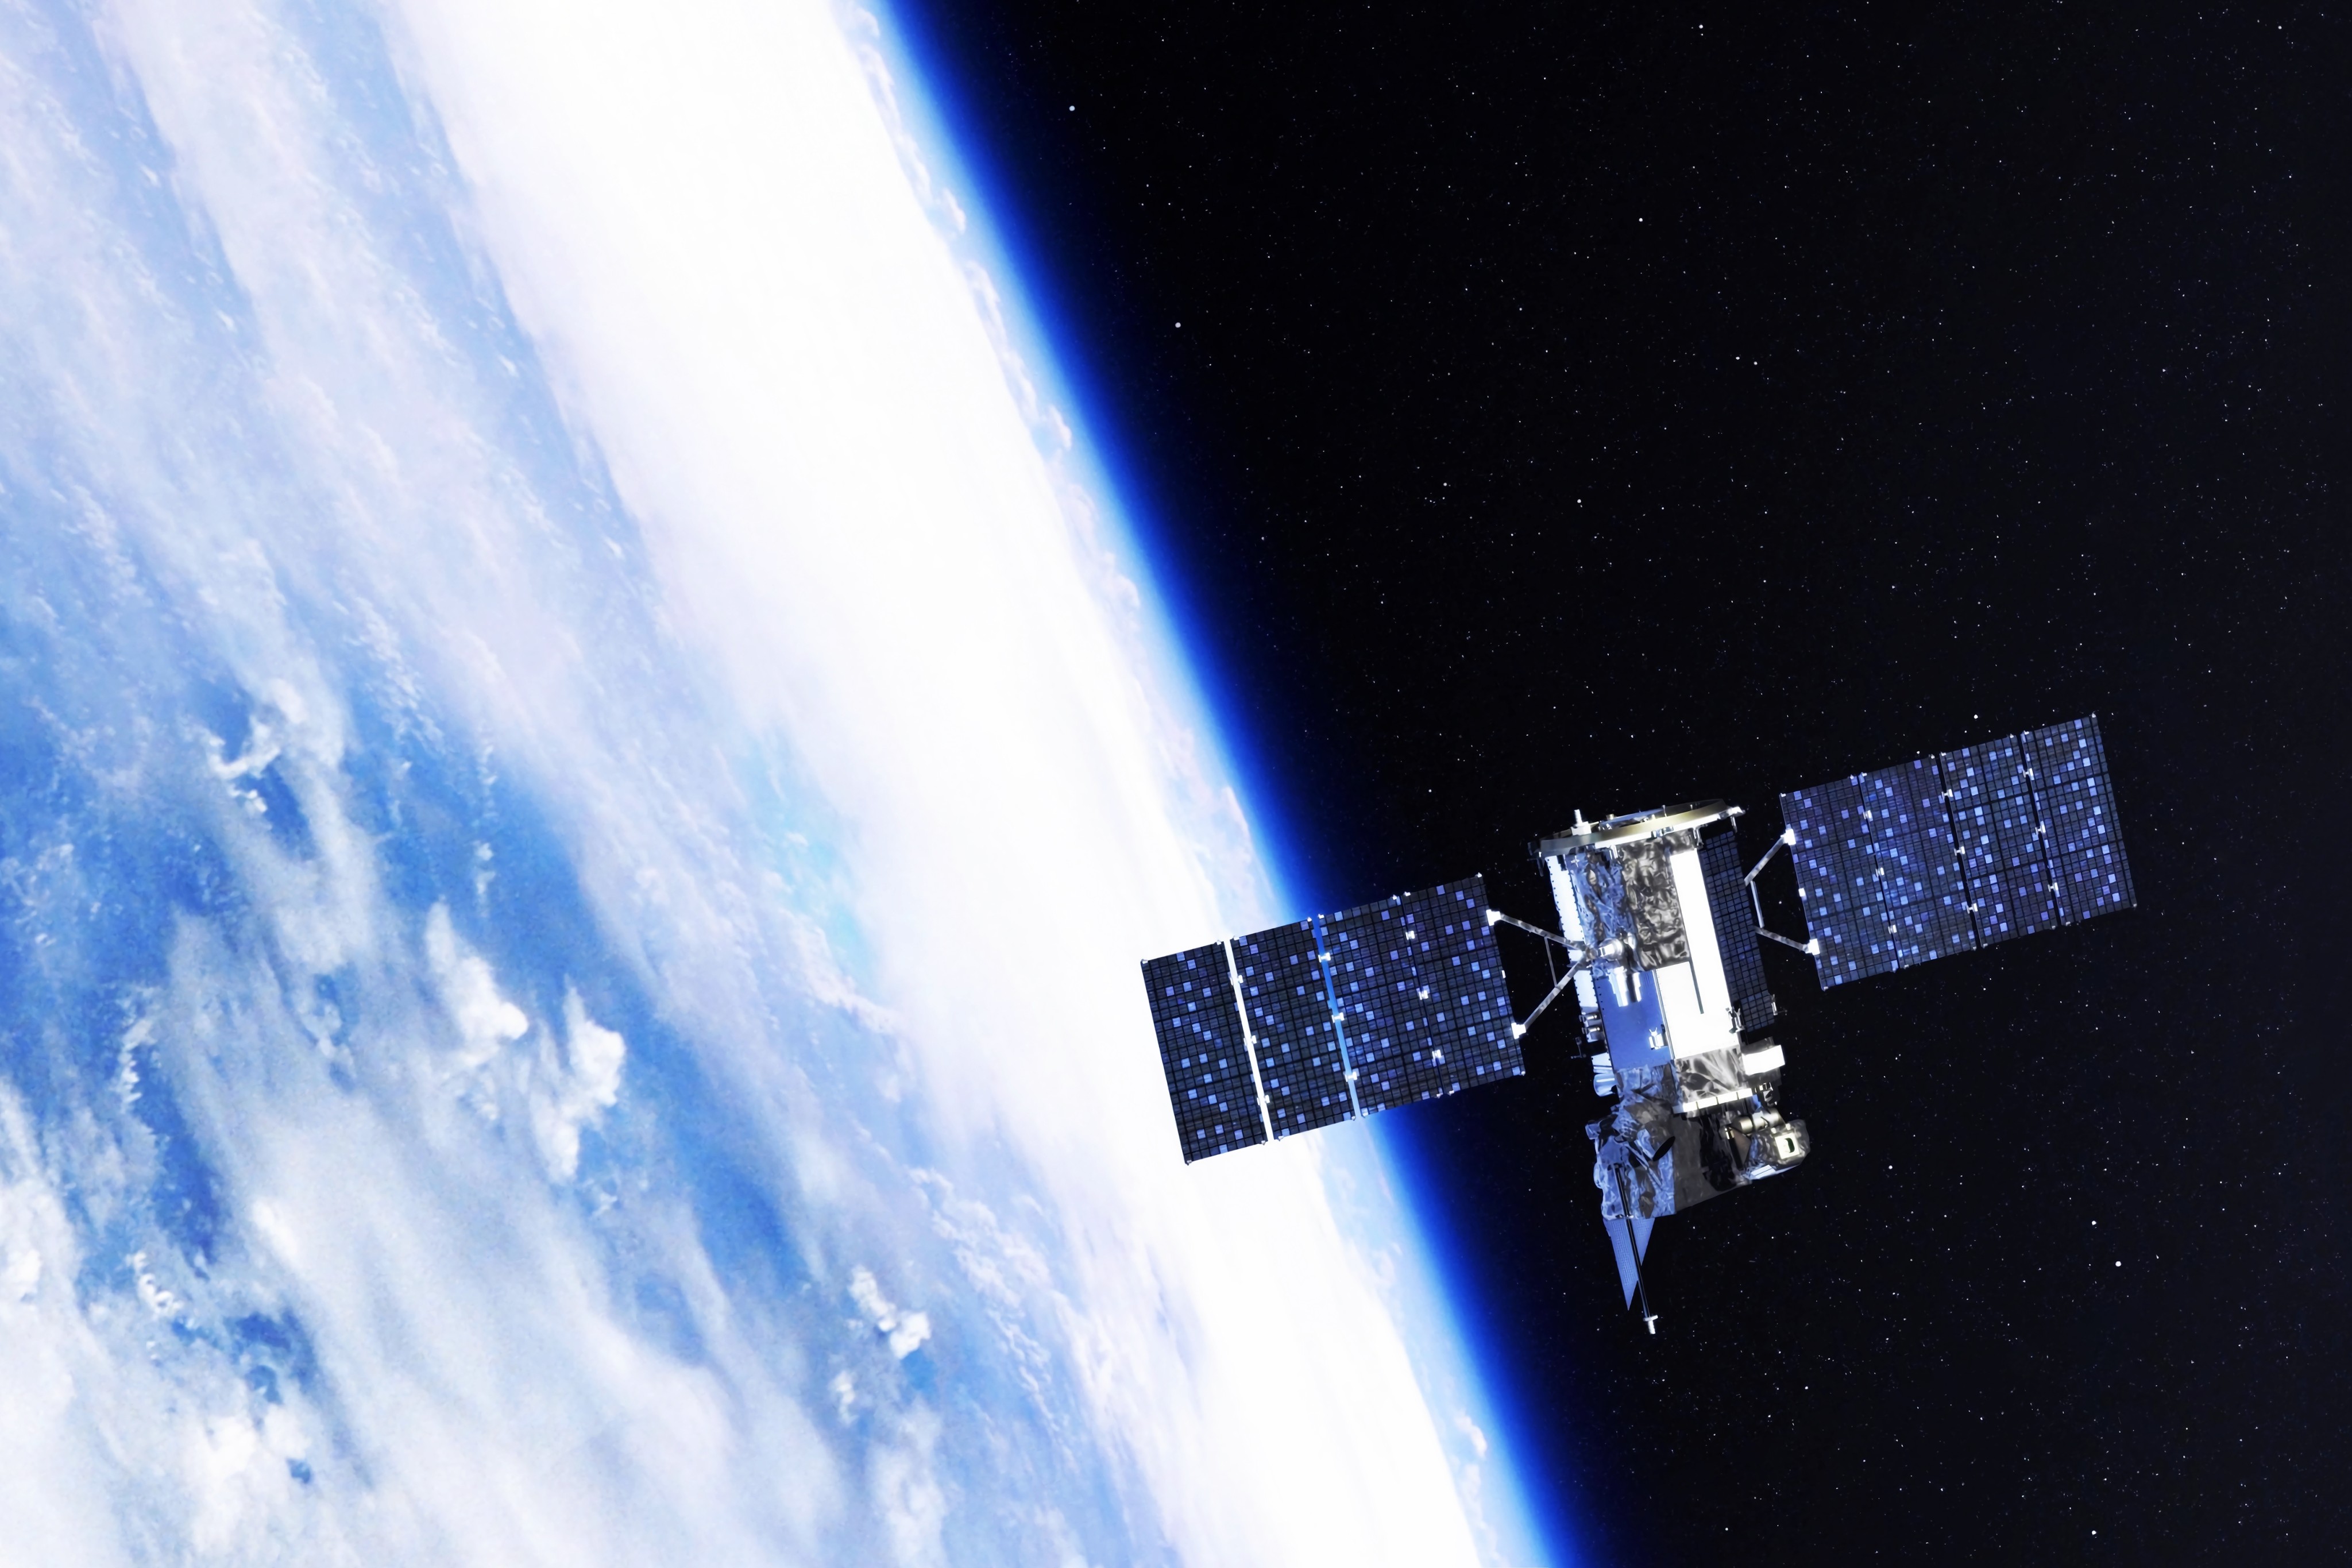 China has a number of GEO satellites in orbit that serve a variety of purposes, including communications, navigation and remote sensing. Photo: Shutterstock Images